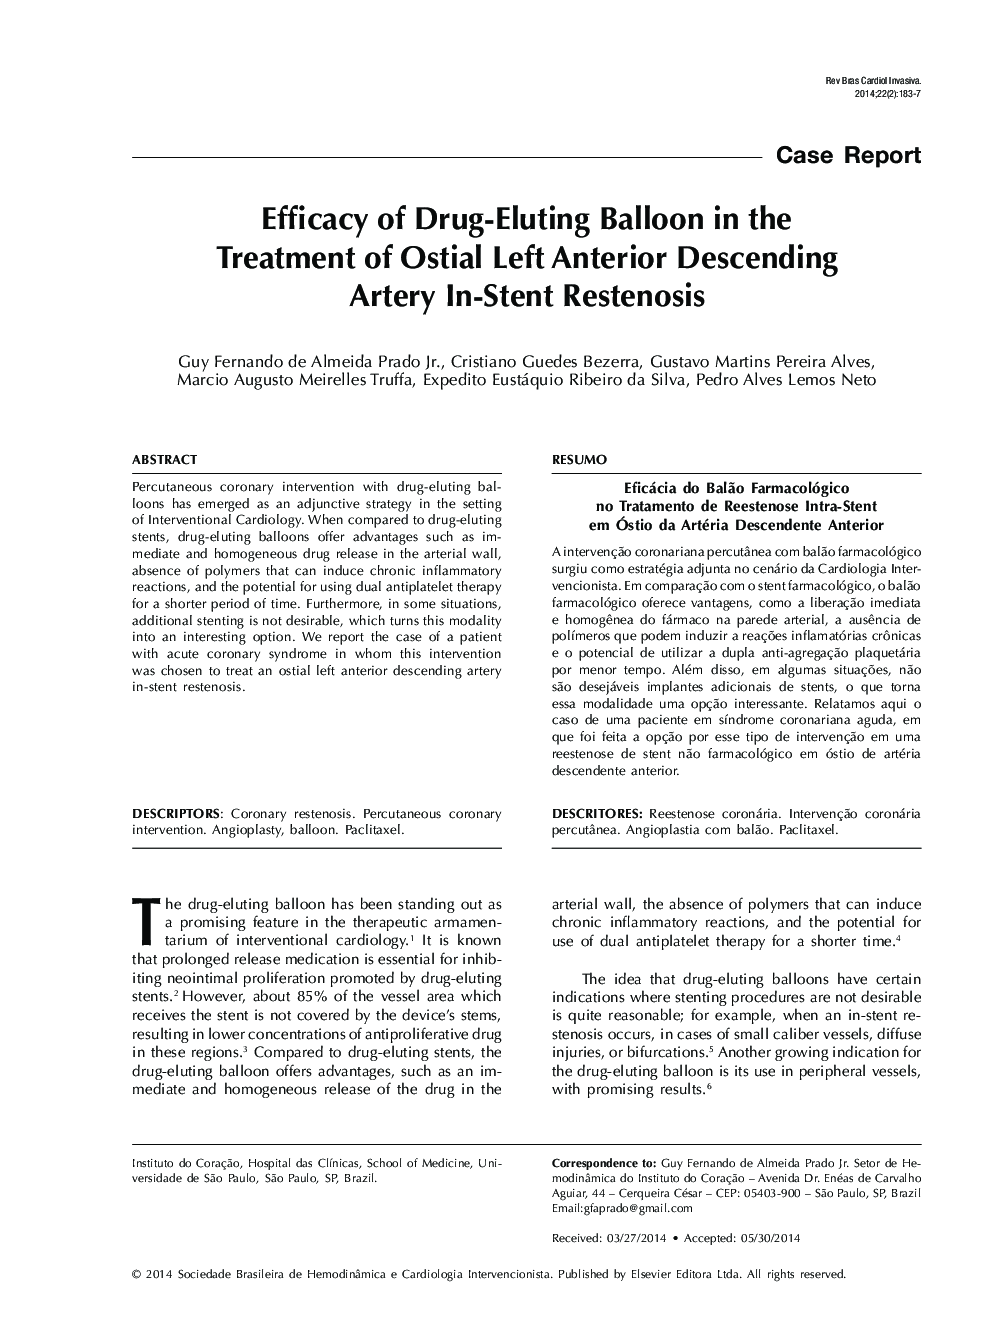 Efficacy of Drug-Eluting Balloon in the Treatment of Ostial Left Anterior Descending Artery In-Stent Restenosis